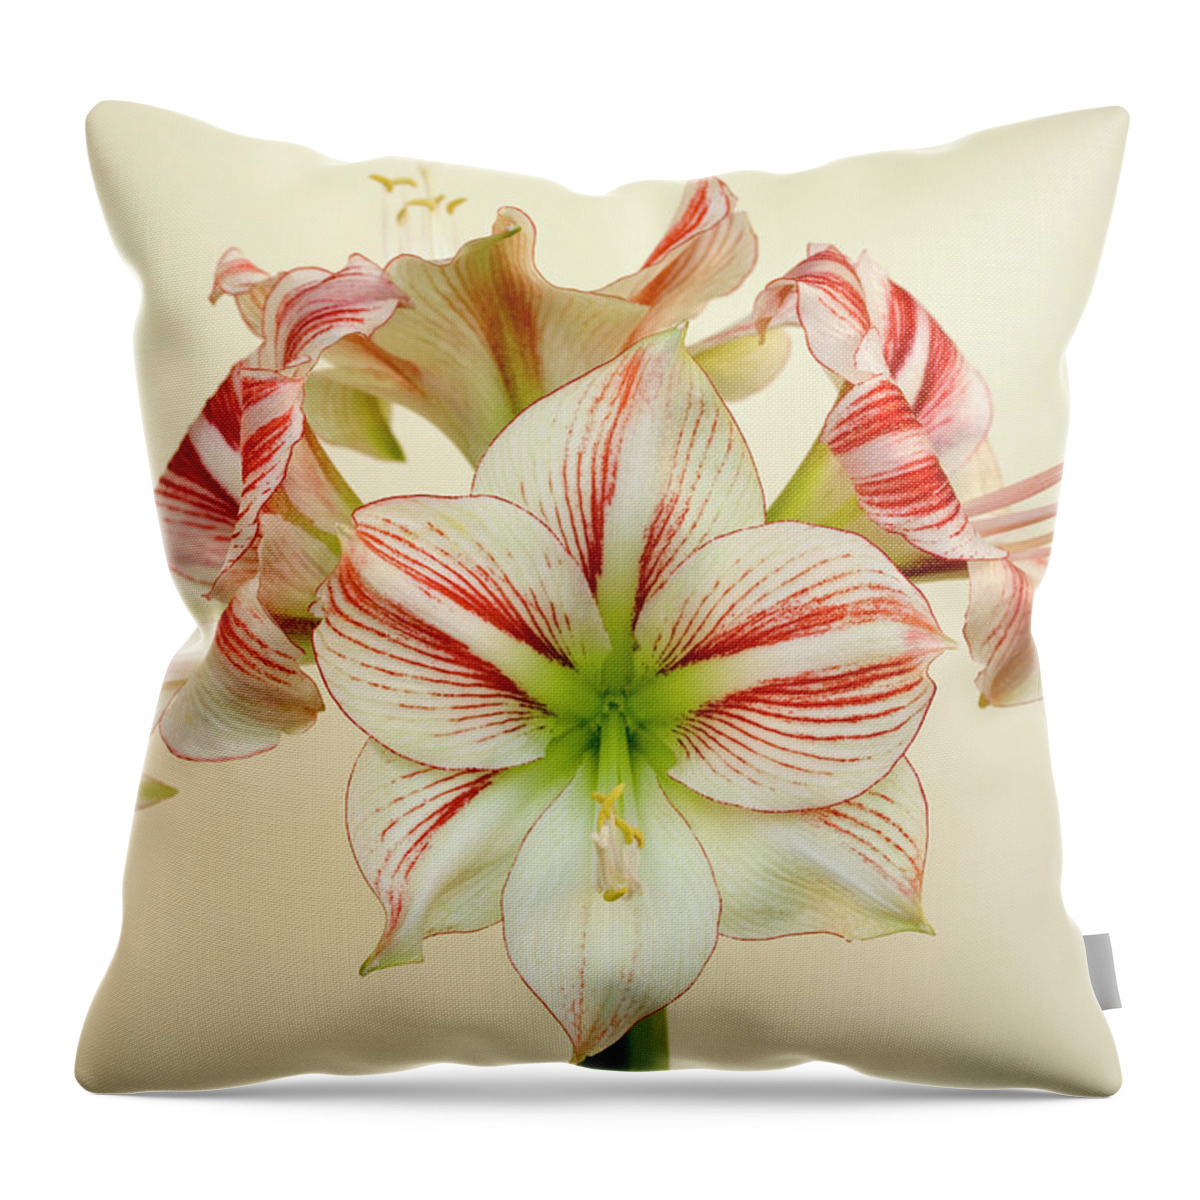 Fragility Throw Pillow featuring the photograph Full Bloom by Brianhaslam